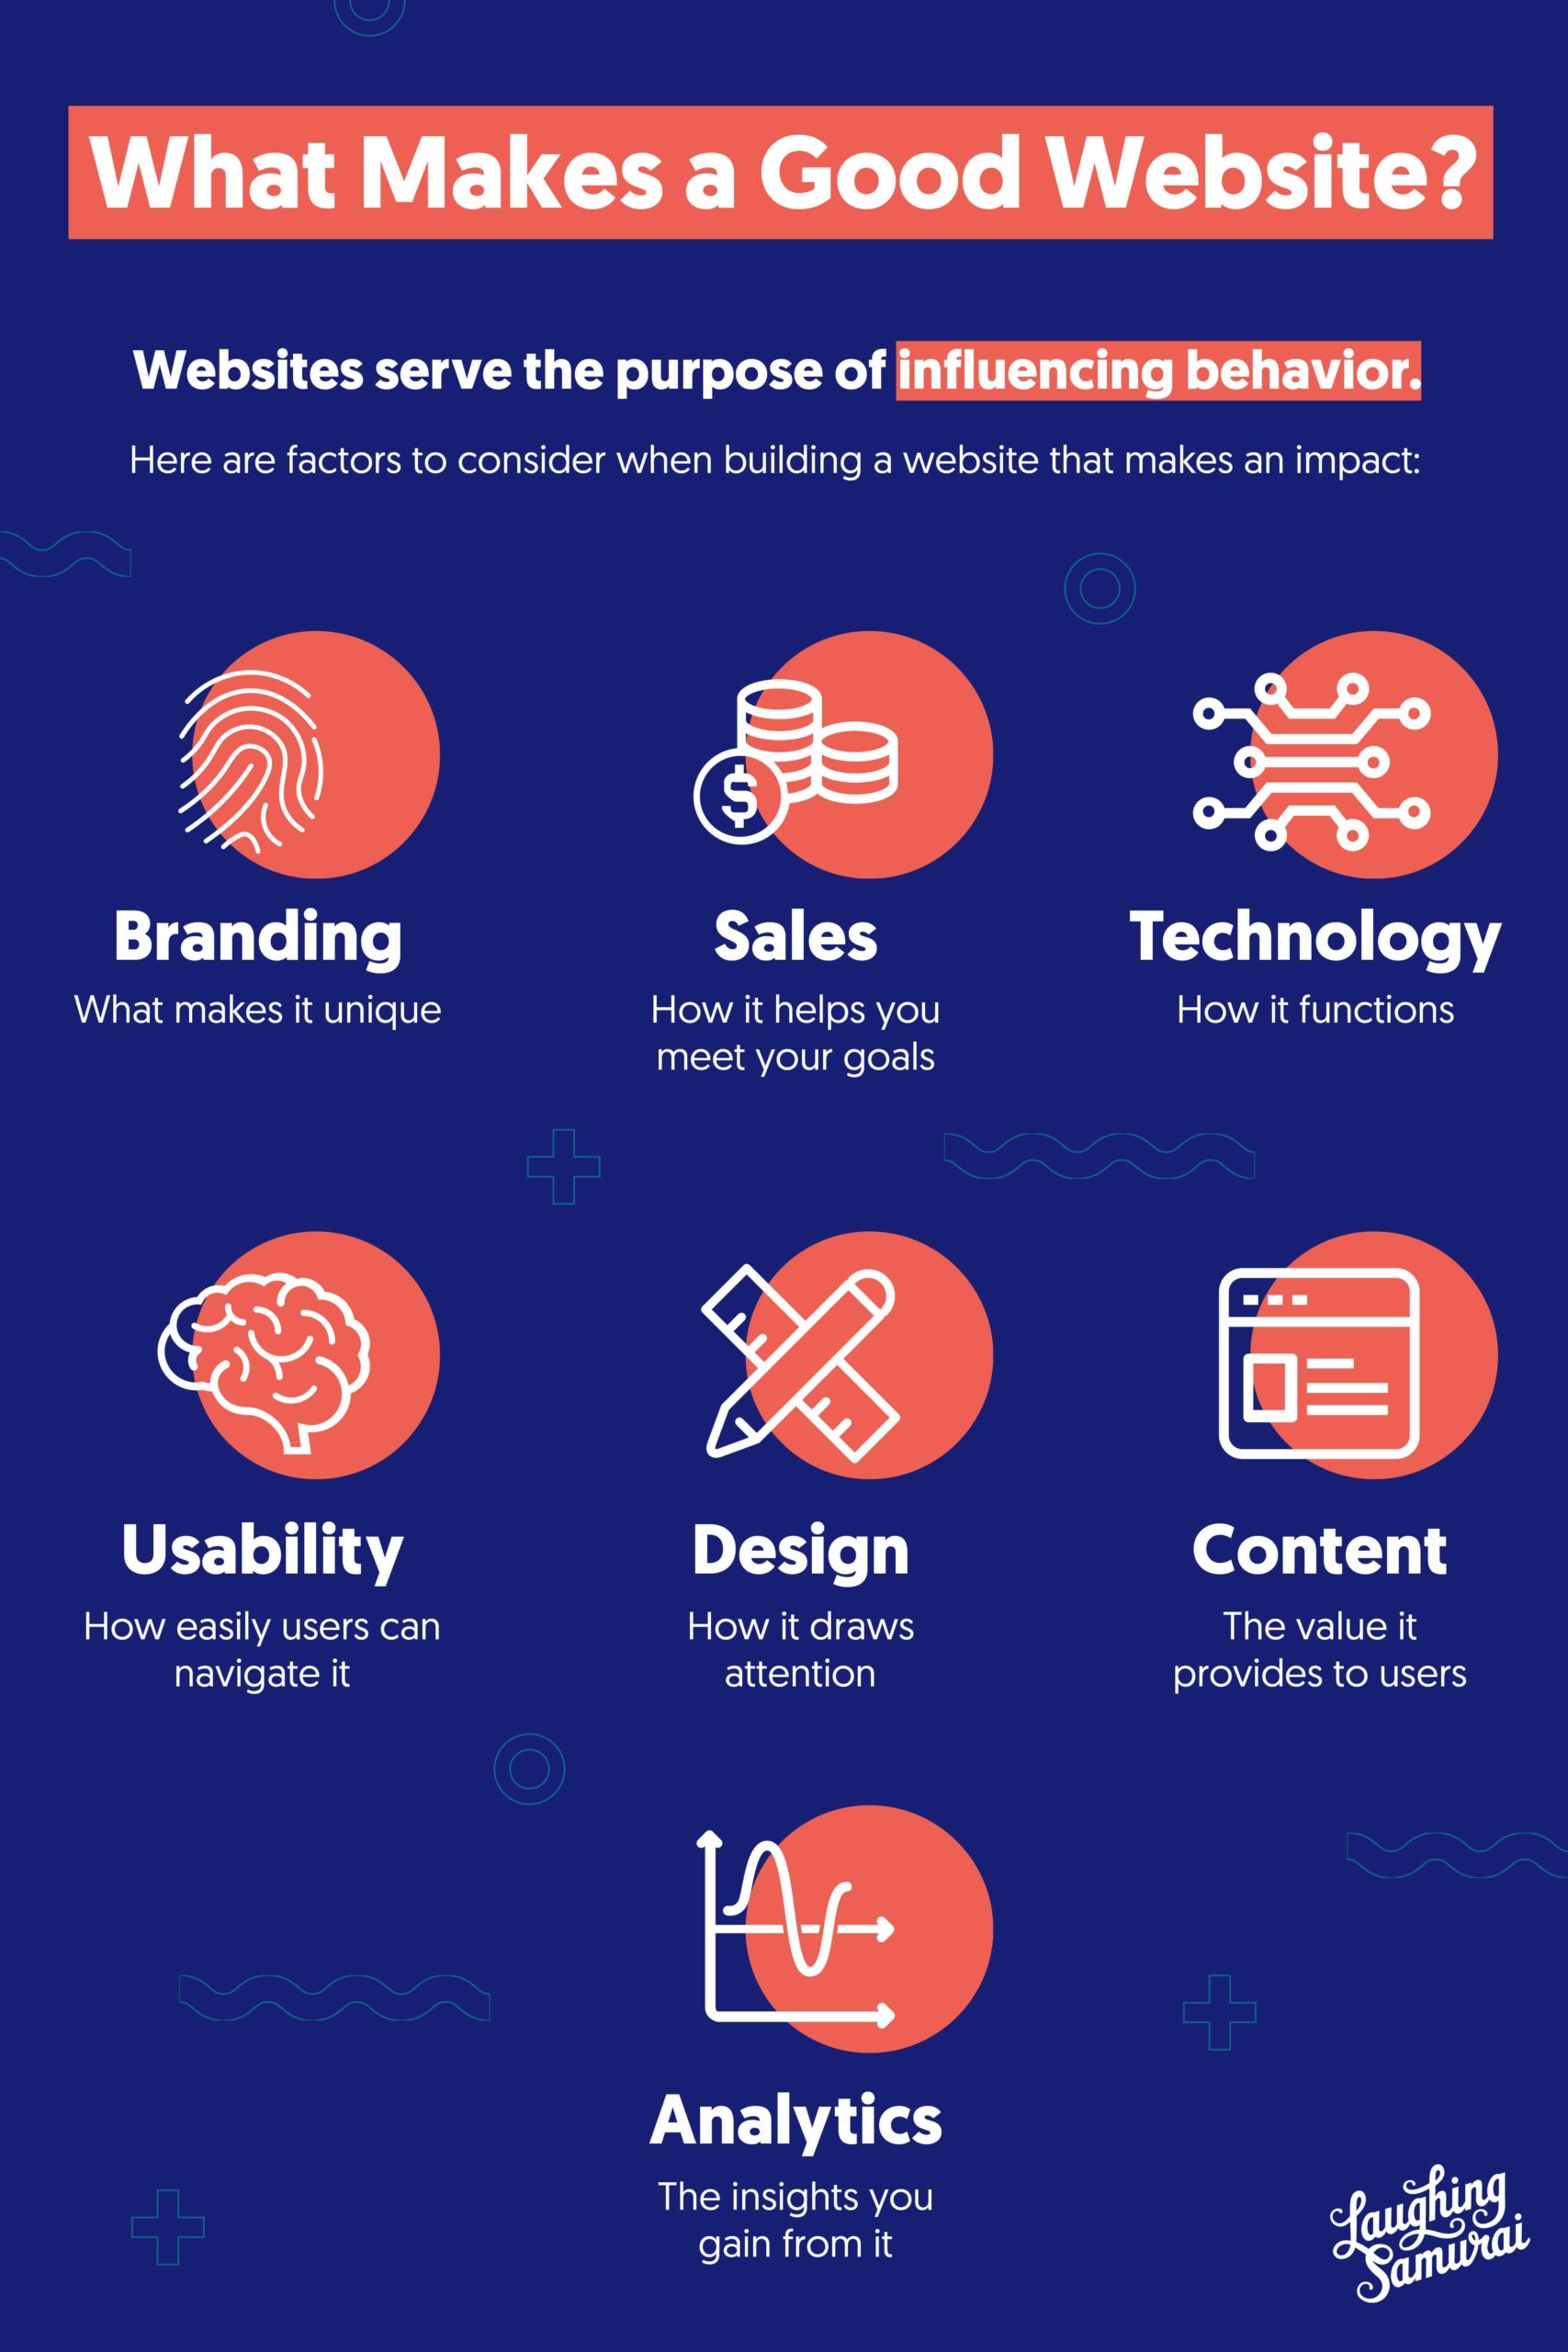 Boldist - What Makes a Good Website? Infographic